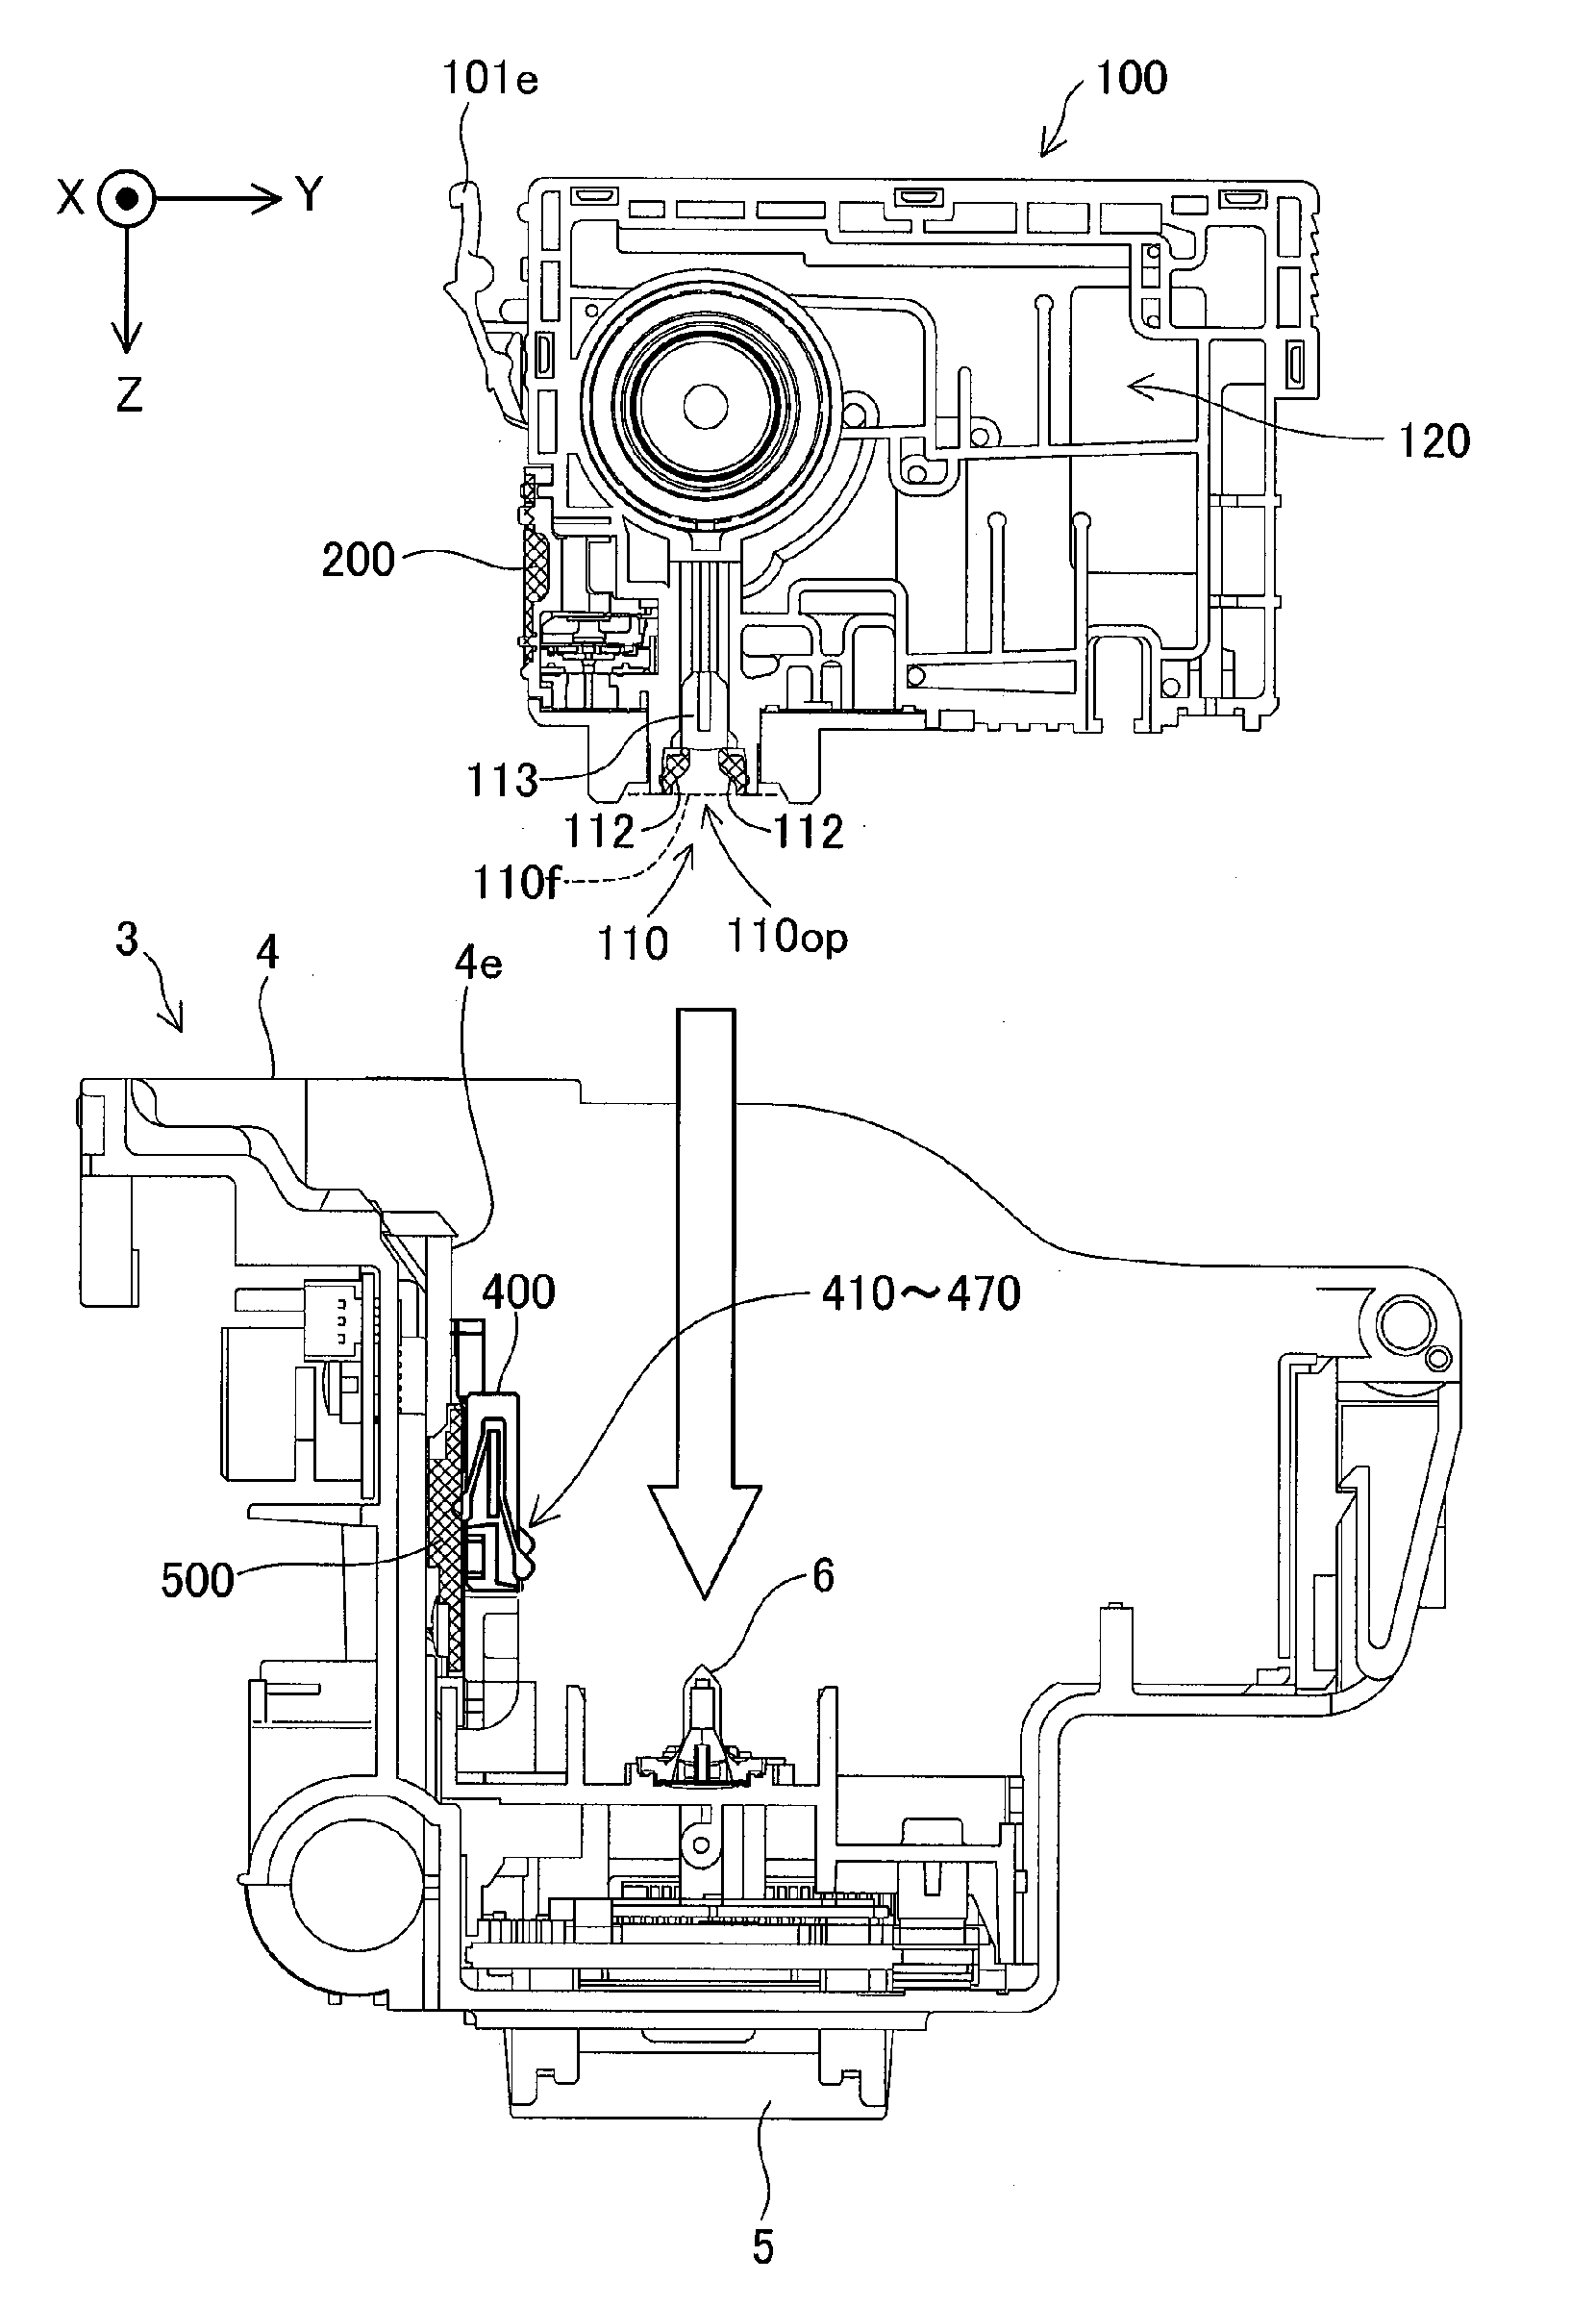 Recording material delivery system for recording material-consuming apparatus; circuit board; structural body; and ink cartridge